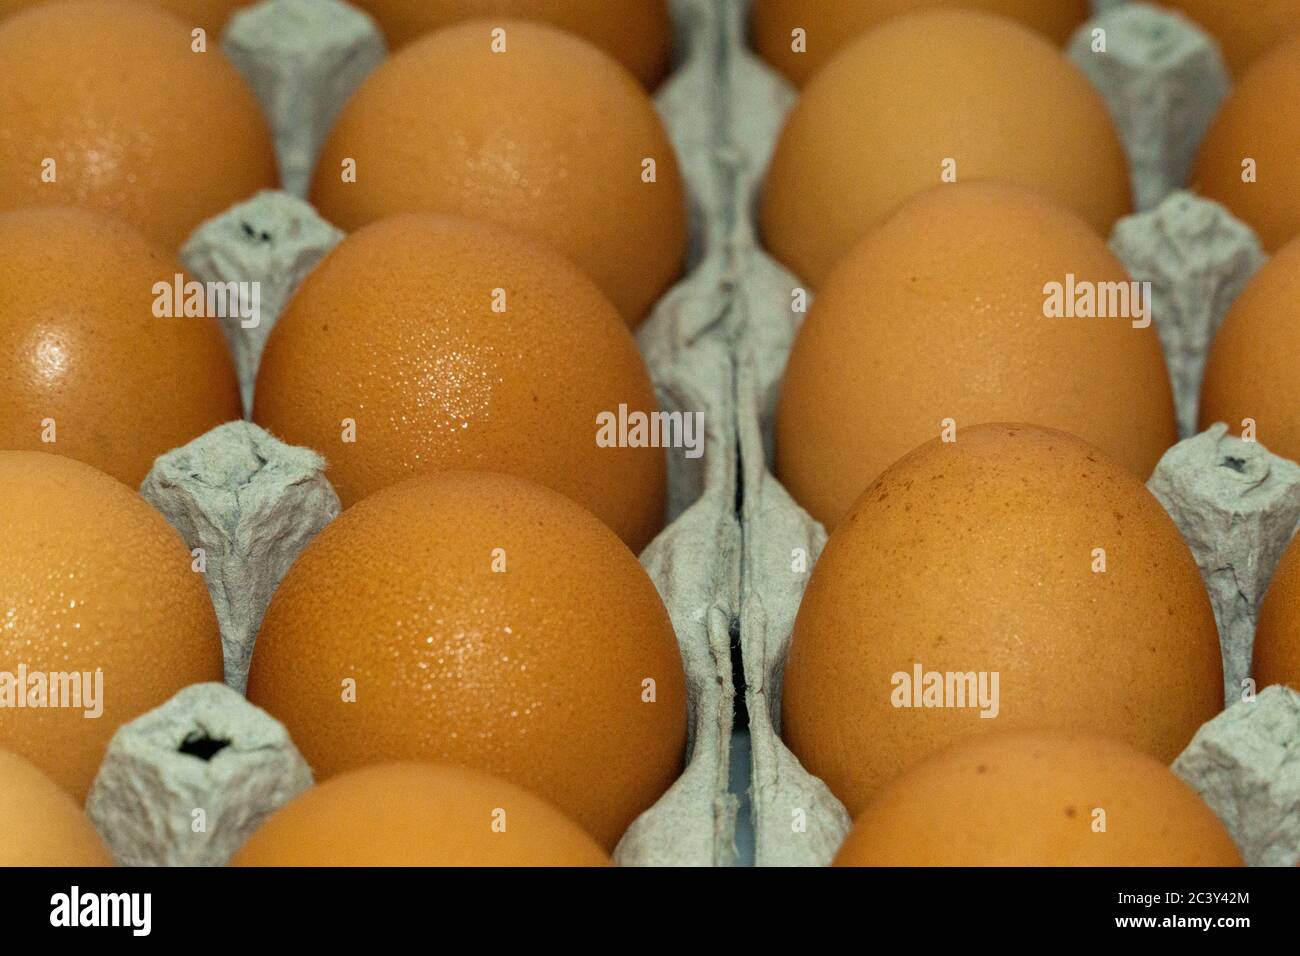 Eggs Brown Large organized nicely in lines in egg carton close up stock photograph Stock Photo